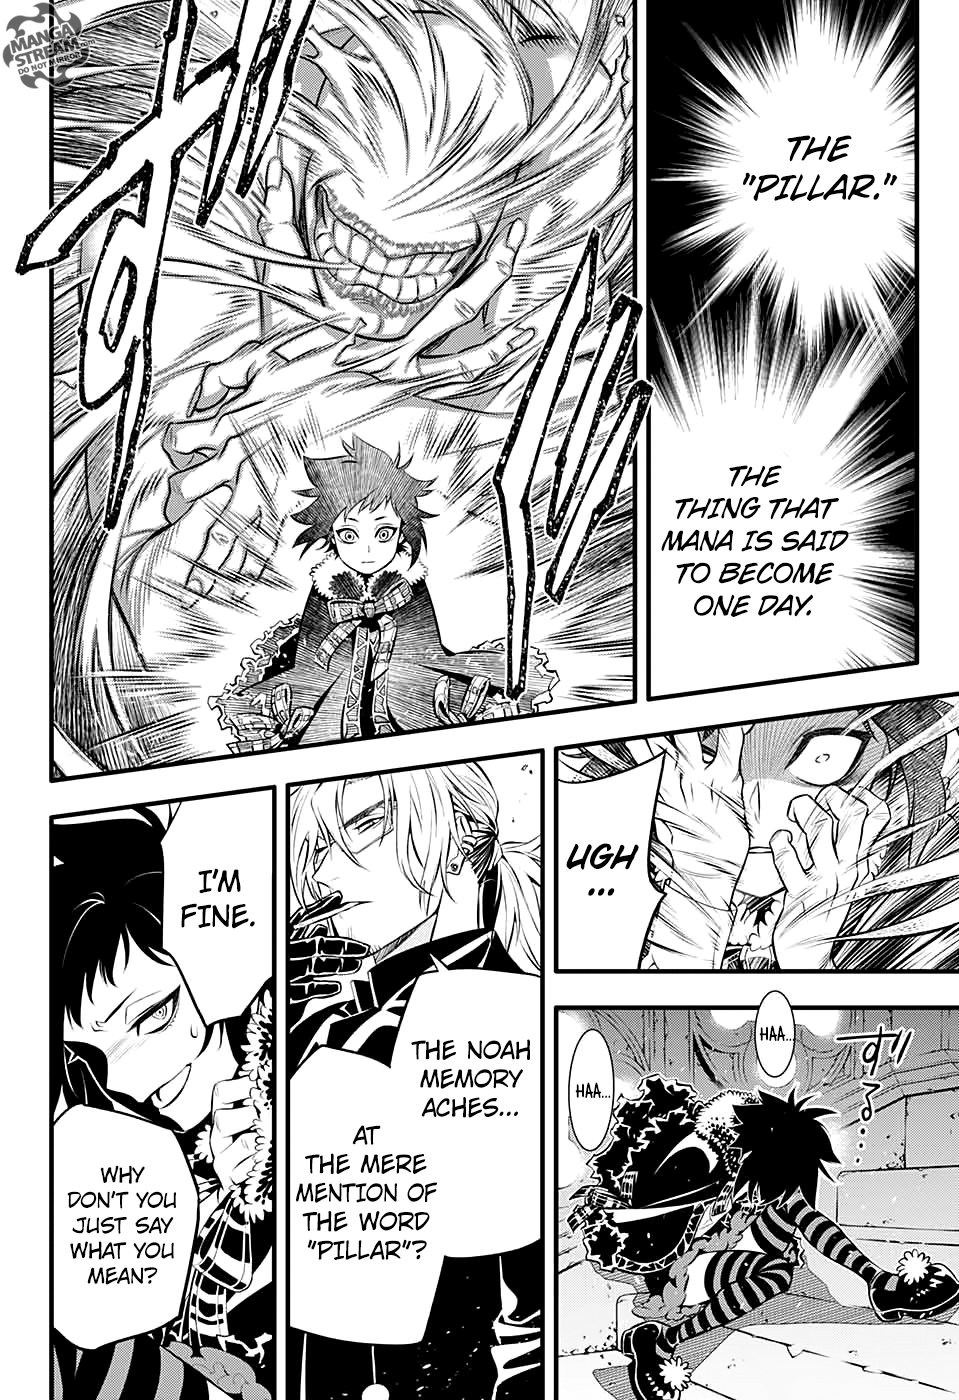 D.Gray-man chapter 234 page 14